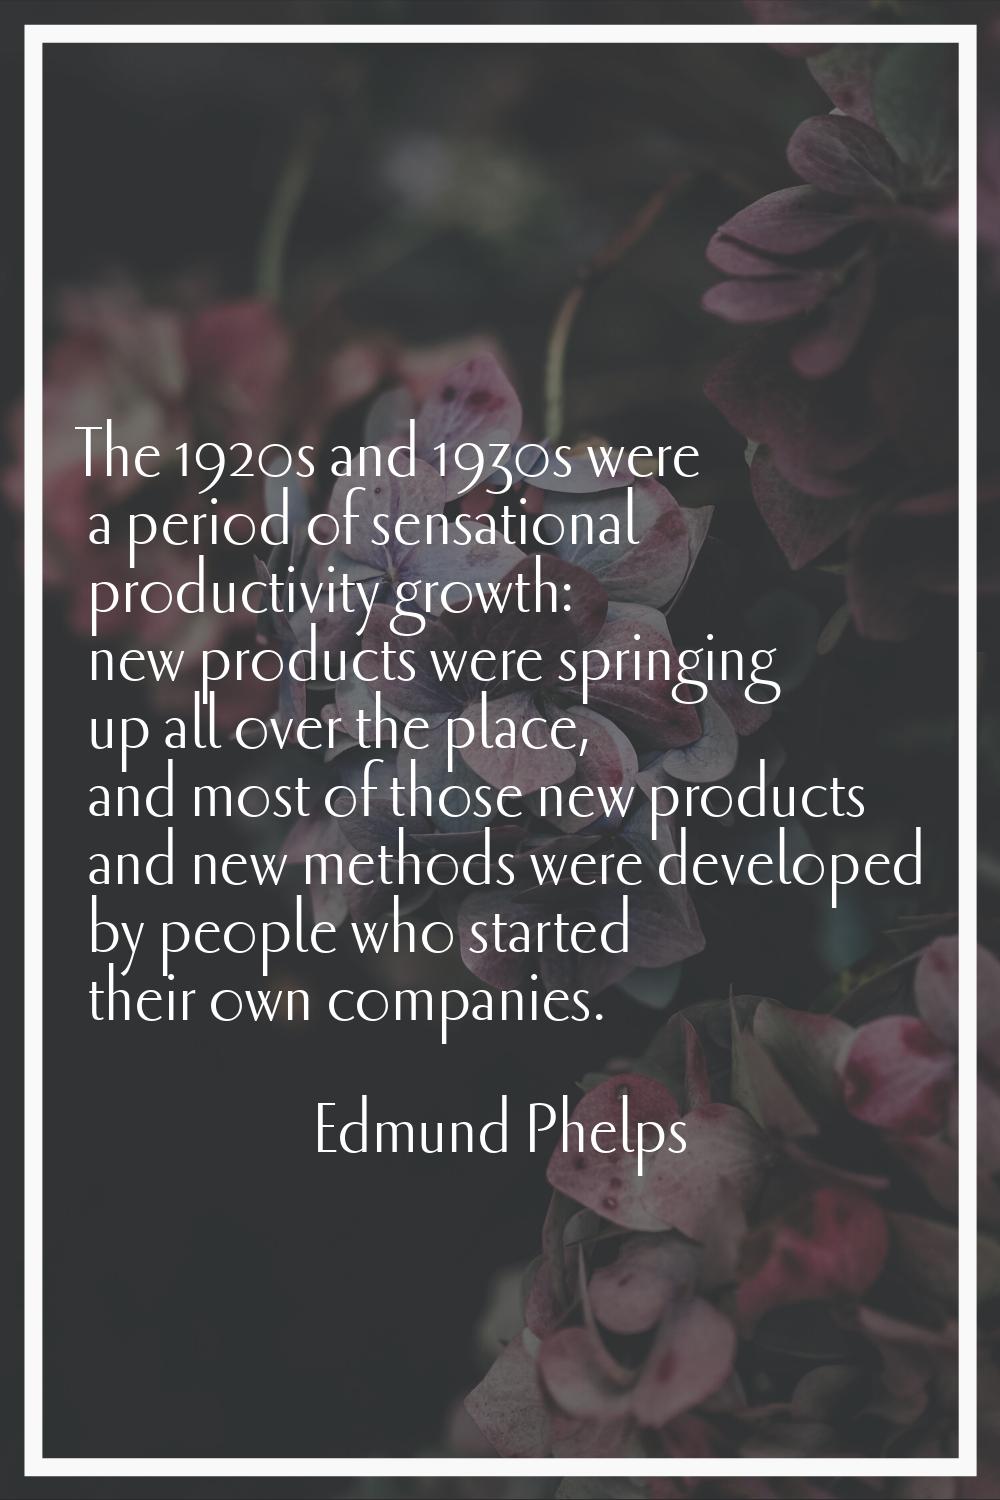 The 1920s and 1930s were a period of sensational productivity growth: new products were springing u